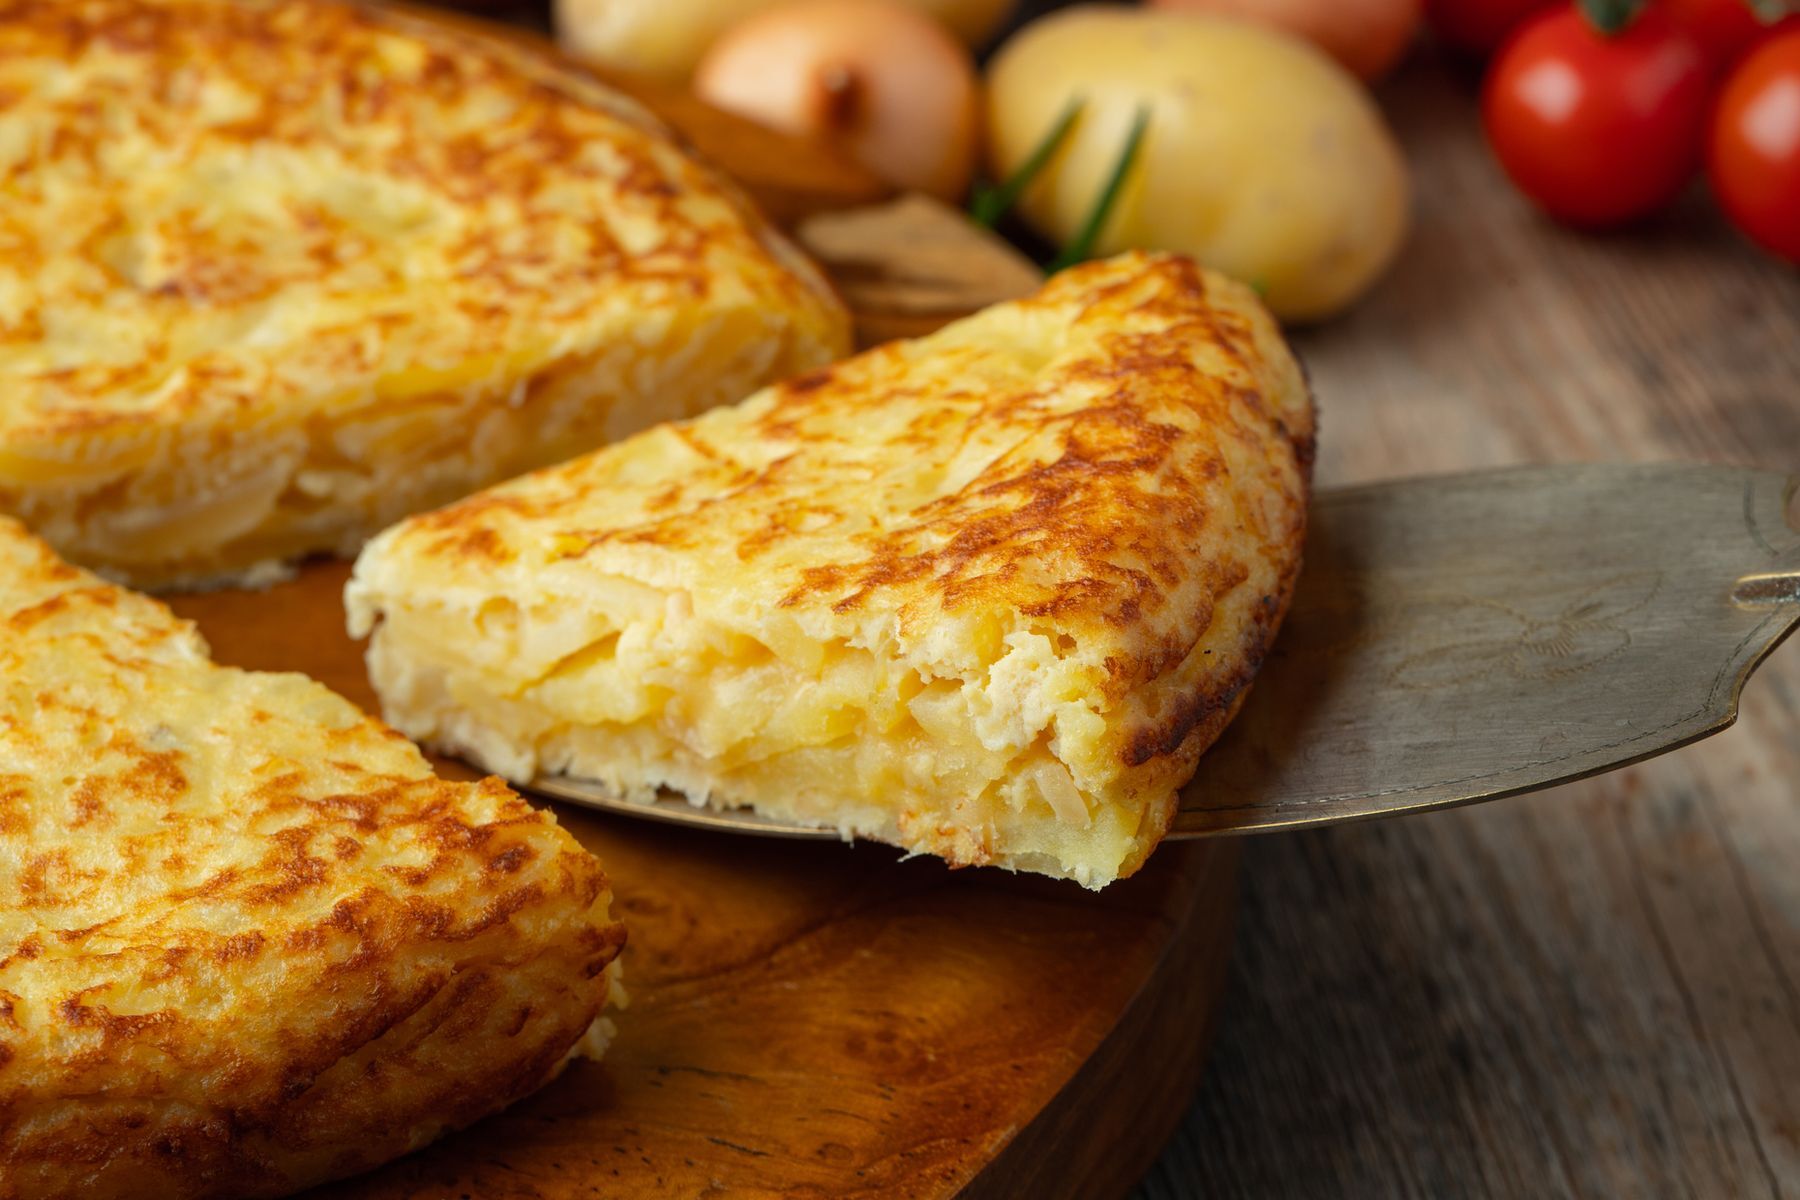 <p>Turn yesterday’s fries into a tortilla by serving this <a href="http://www.kimchiandbeans.com/2020/05/day-old-french-fry-spanish-tortilla.html">Spanish omelette</a> either hot (as a slice of pie with a salad) or cold (as a bite-sized snack).</p>